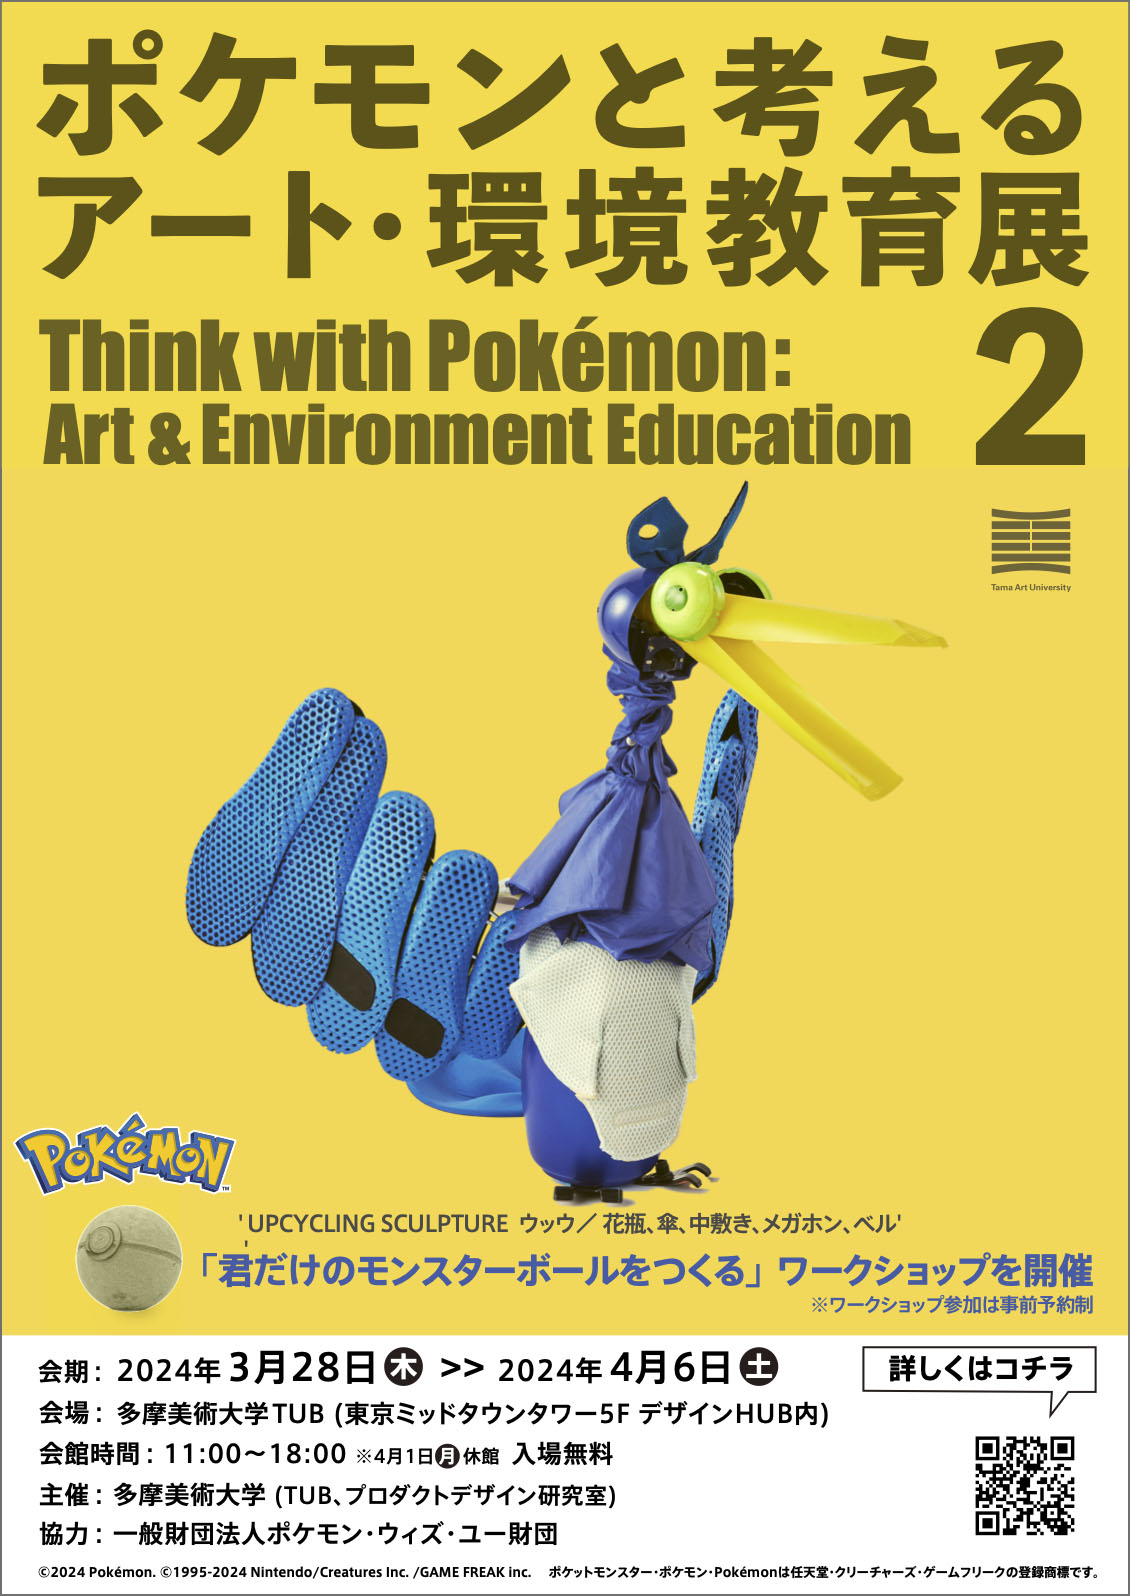 Think with Pokemon art exhibit 2 upcycling sculpture - Cramorant